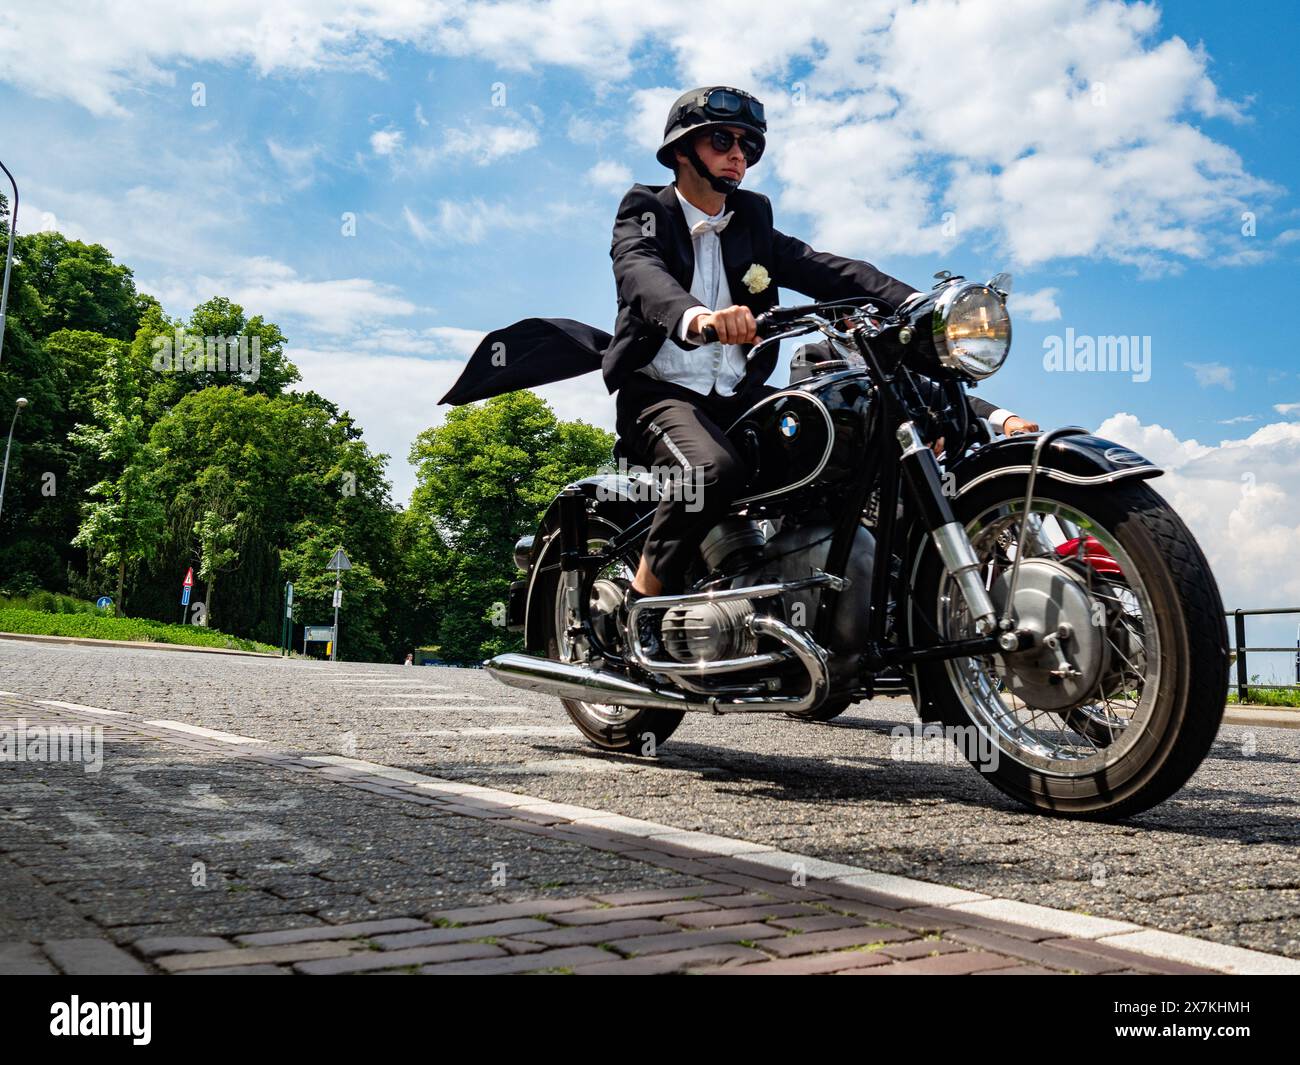 A man wearing a tuxedo jacket rides a motorbike. The Distinguished Gentleman's Ride unites classic and vintage-style motorcycle riders worldwide to raise funds and awareness for prostate cancer research and men's mental health. In Nijmegen more than two hundred motorcycle riders, raised around 30.000€.The Distinguished Gentleman's Ride (DGR) raises funds for The Movember Foundation, the leading global charity changing the face of men's health, to improve the lives of men through prostate cancer research and men's mental health initiatives. (Photo by Ana Fernandez/SOPA Images/Sipa USA) Stock Photo